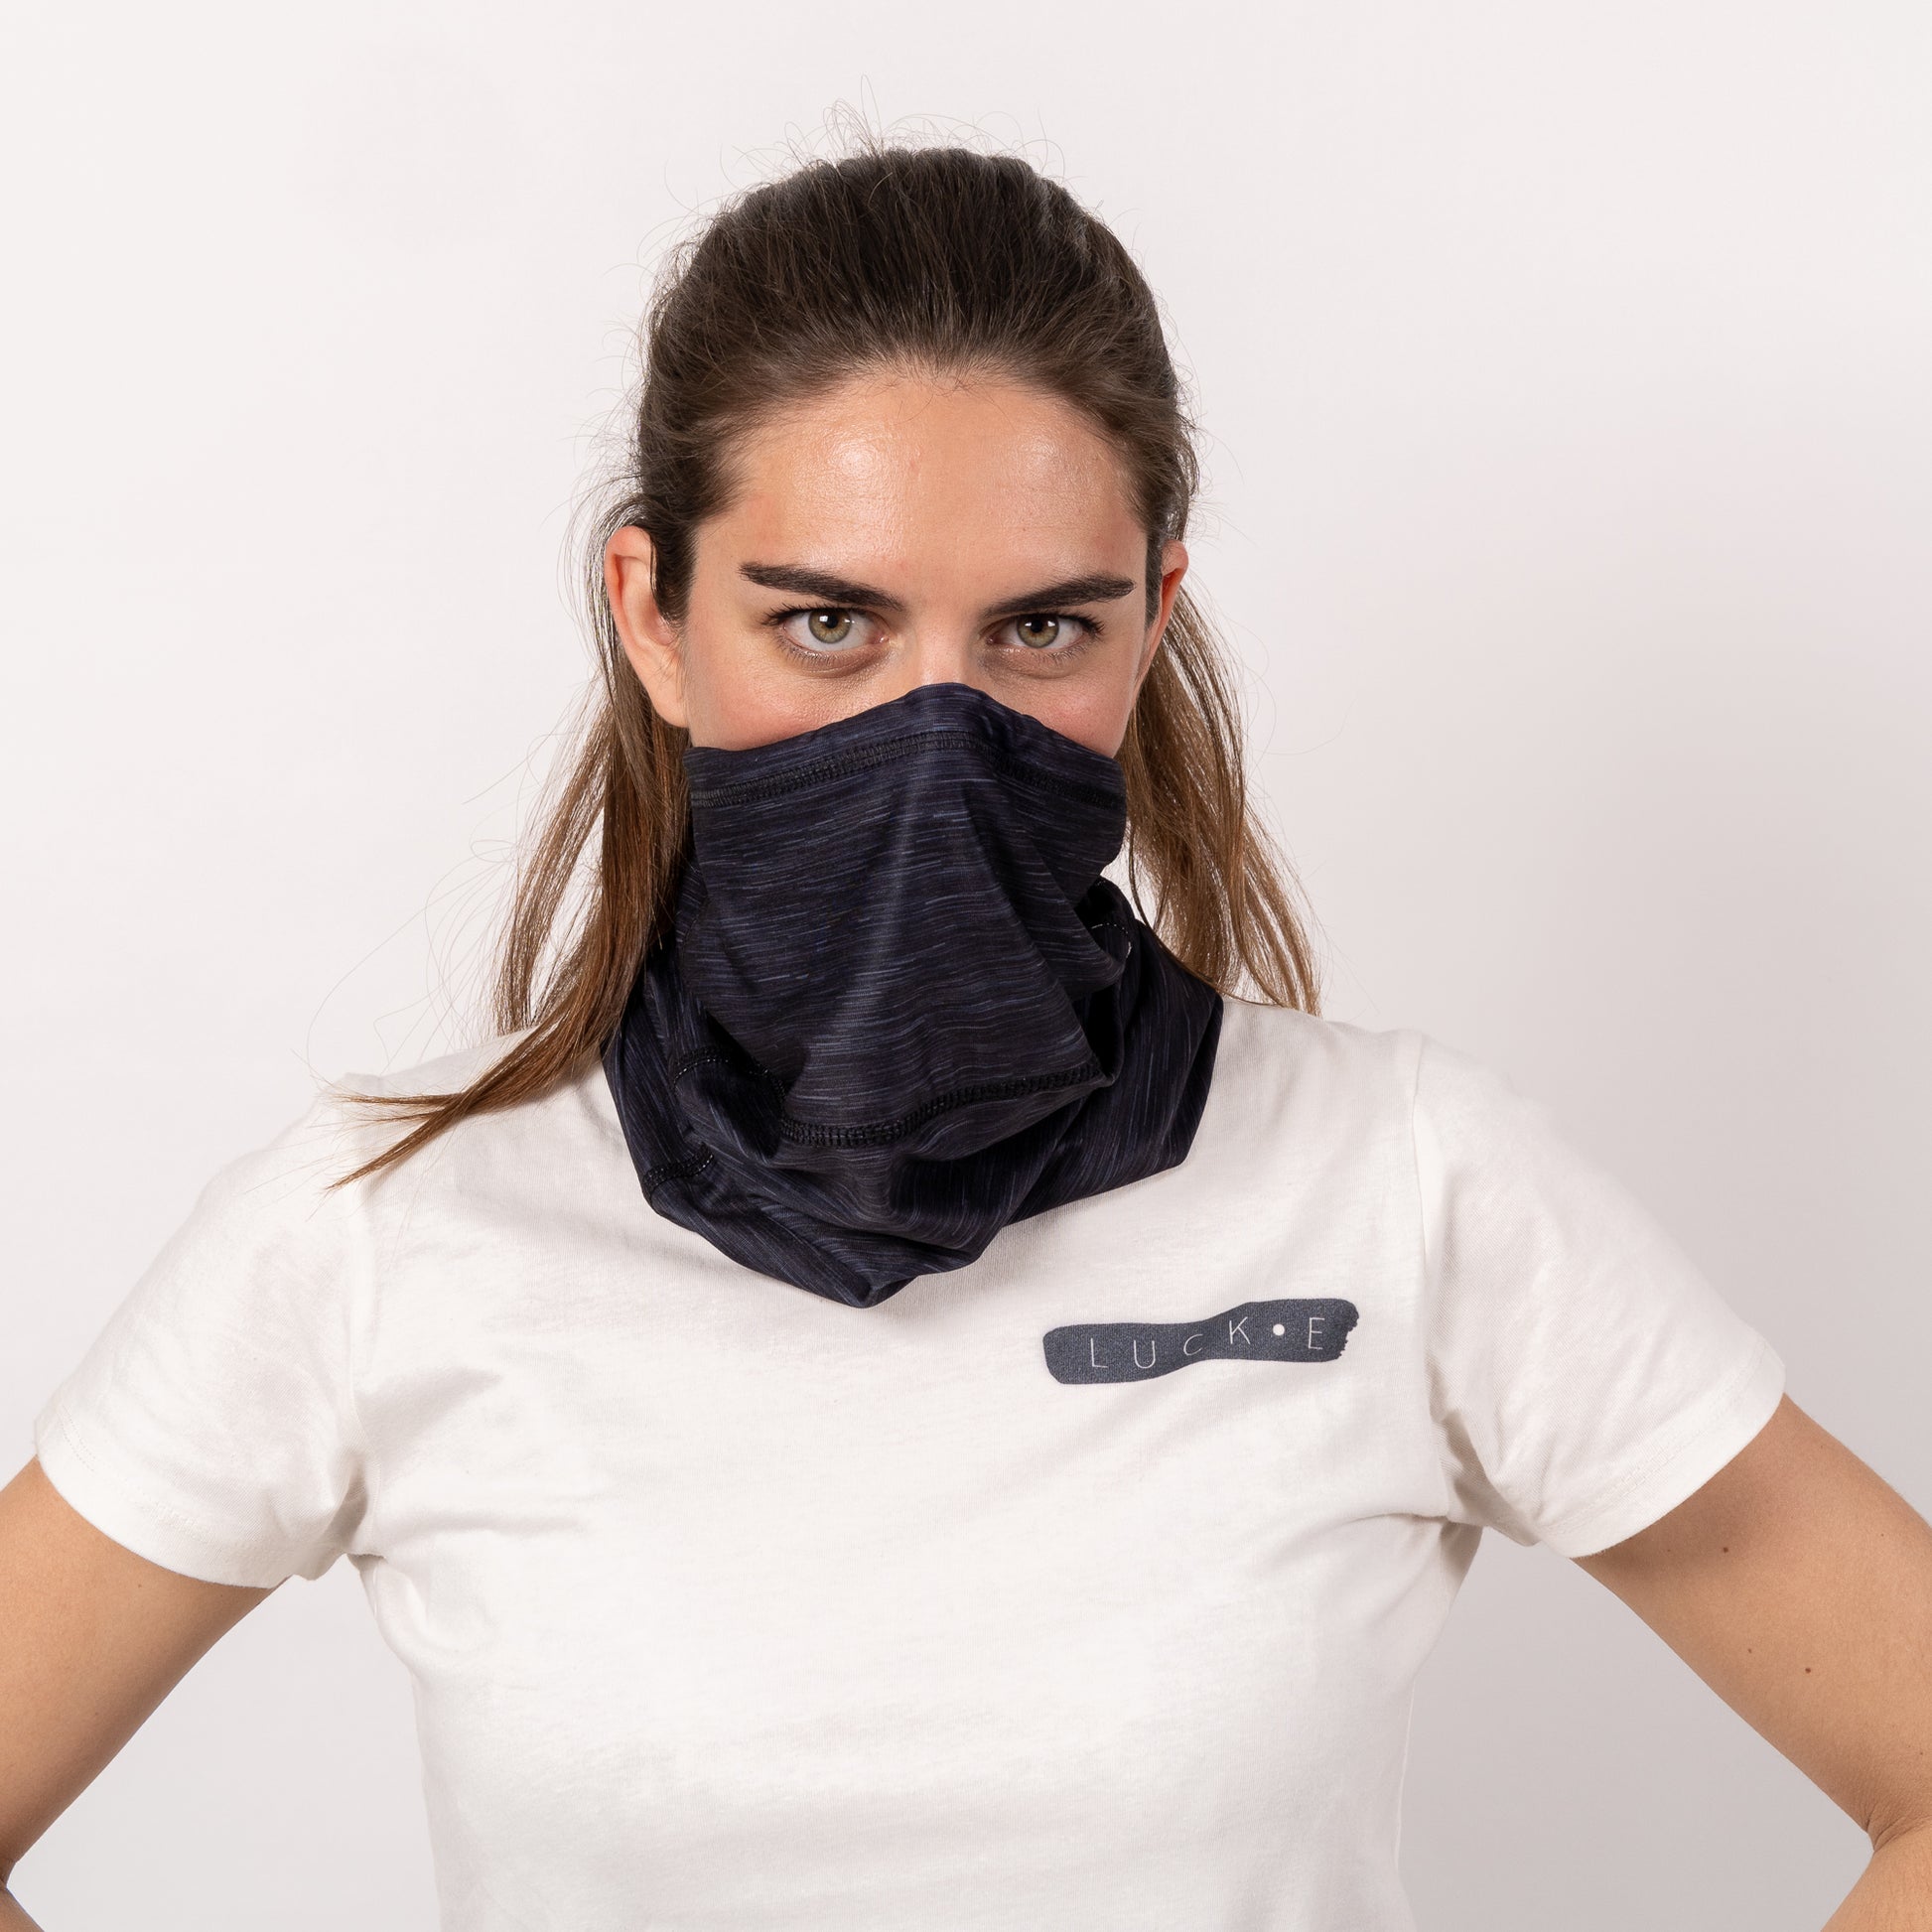 LUCKEgo™ | With Built-in 3 layer Mask | Heiq Technology | Black LUCK•E